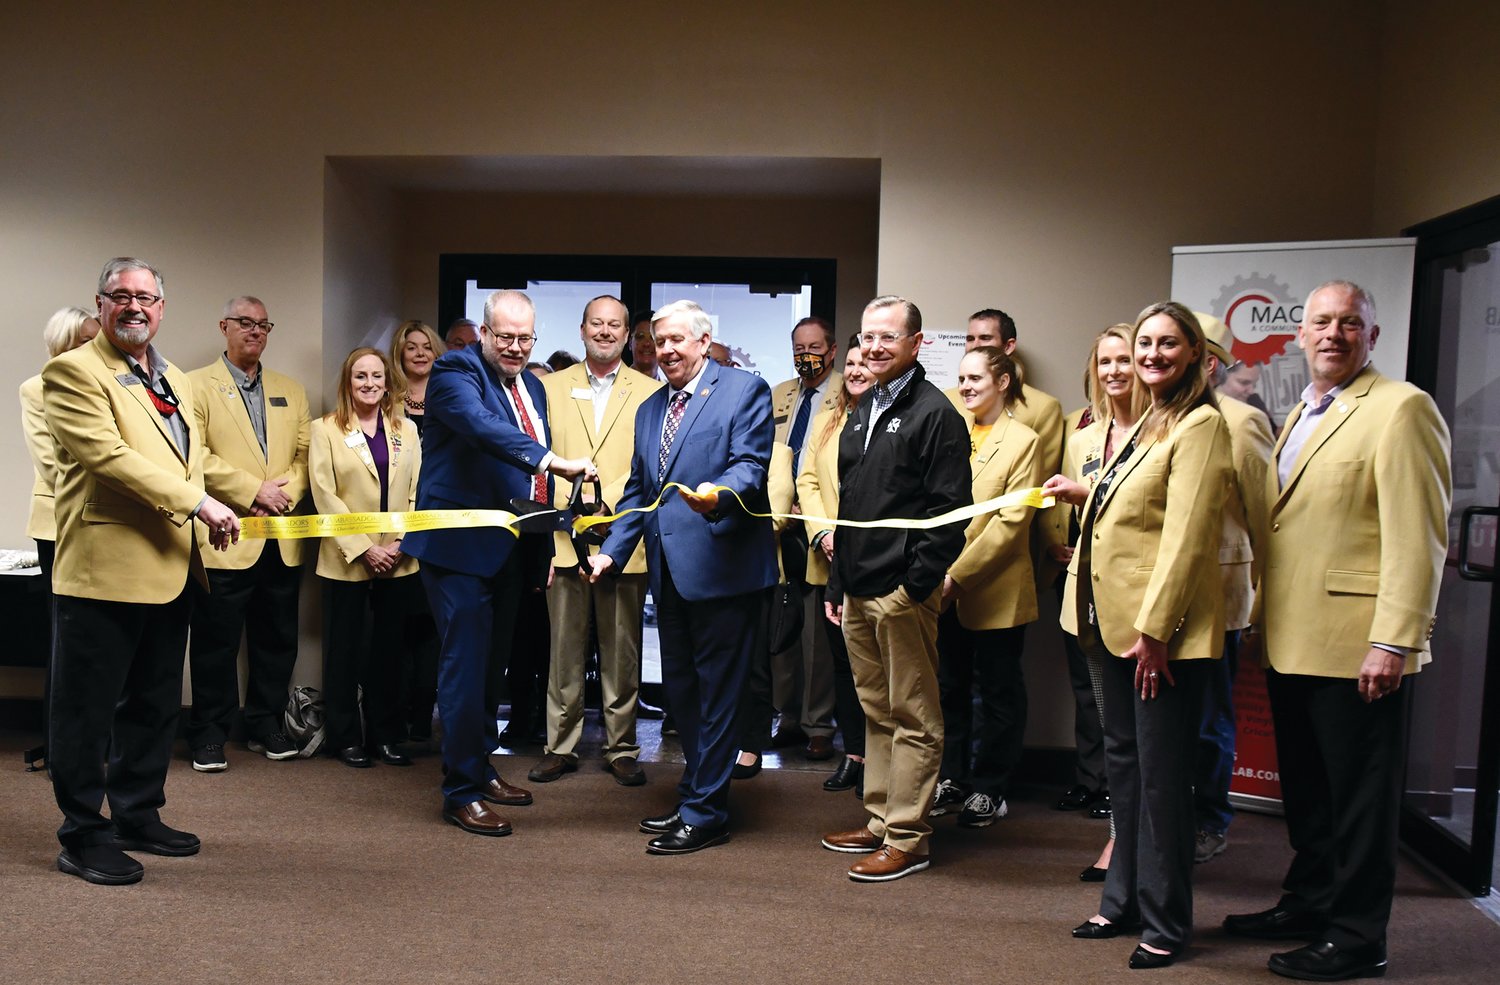 A ribbon cutting ceremony was held March 3 to celebrate the opening of the MACCLab - A Community Makerspace and the Mechatronics Center of Excellence, which are both located on the Moberly Area Community College’s Columbia campus.